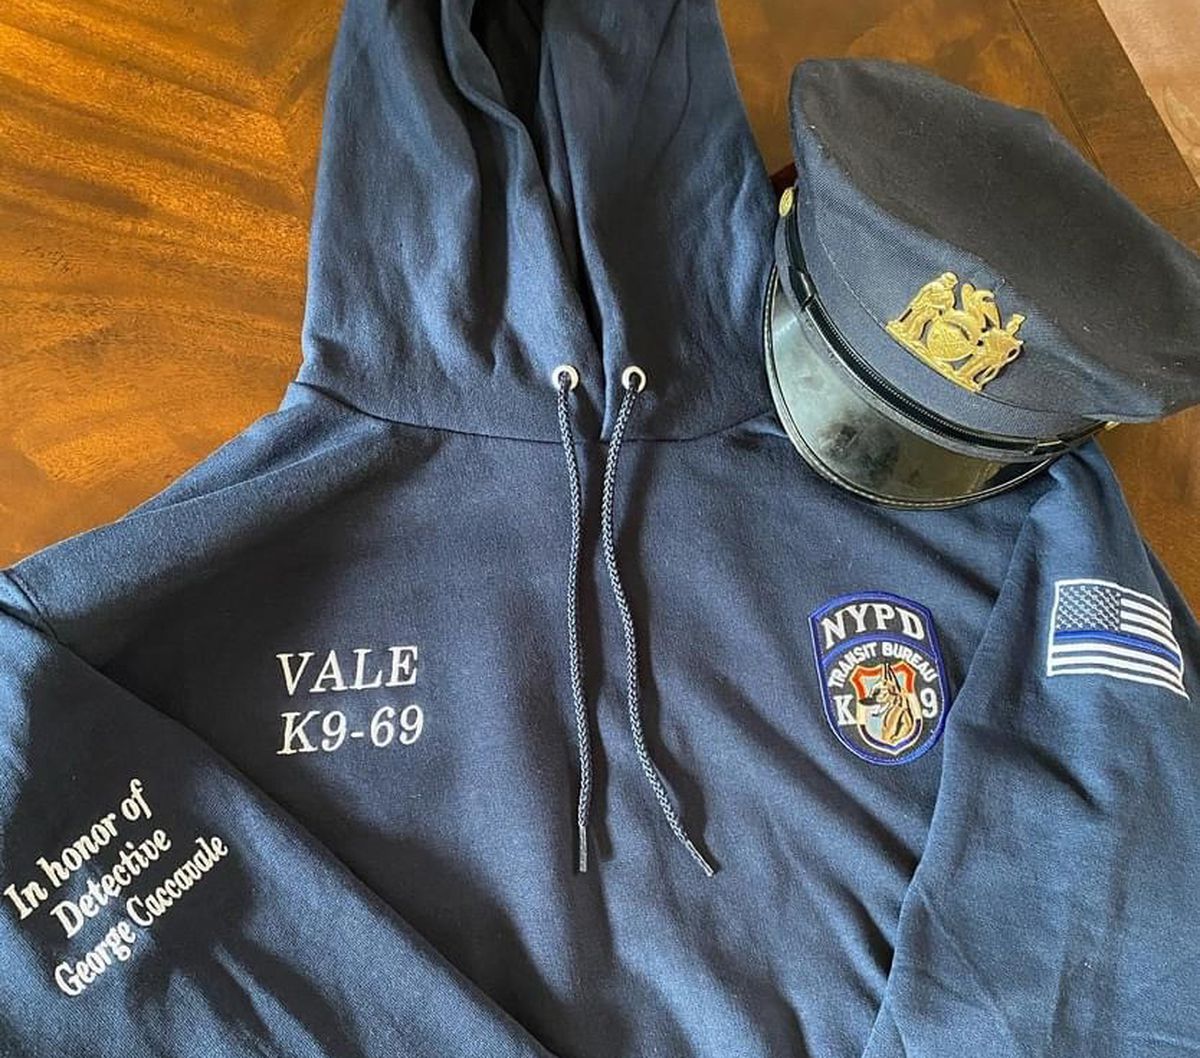 Westchester mom furious at school decision to ban sweatshirt featuring thin blue line patch honoring her slain NYPD officer dad